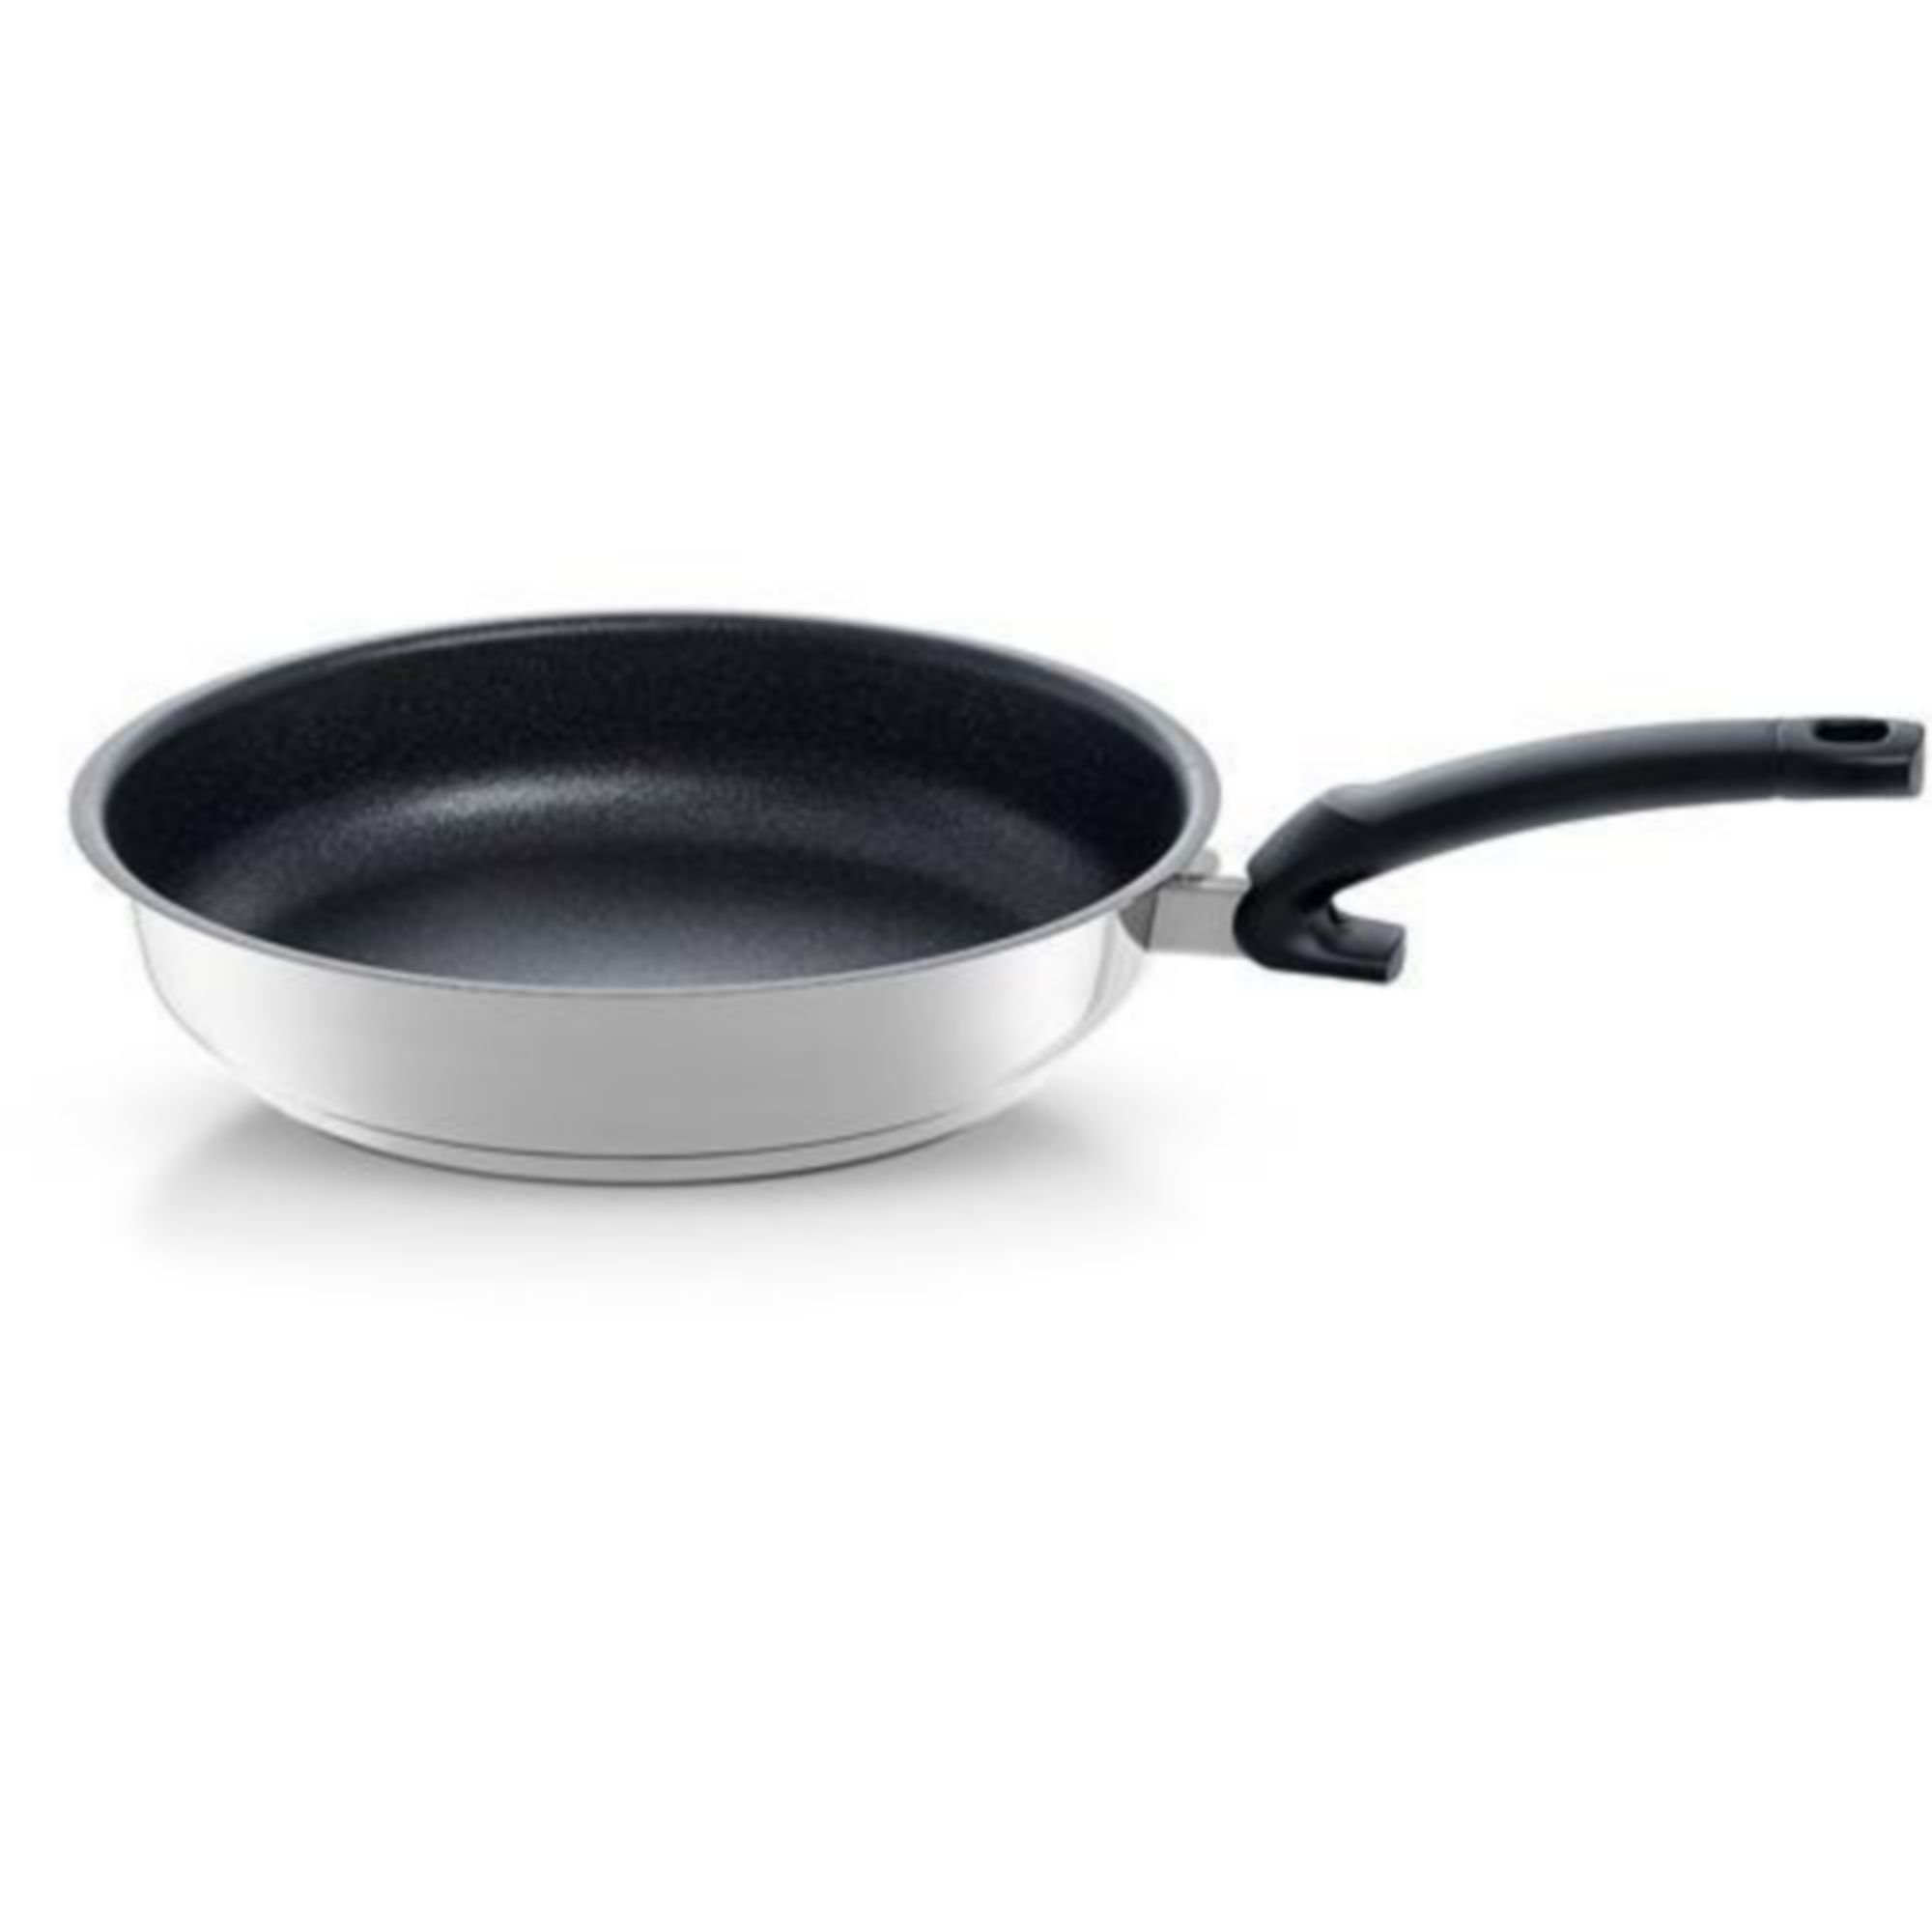 Fissler Teflon Induction Frying Pan Made In Germany 11 Inches